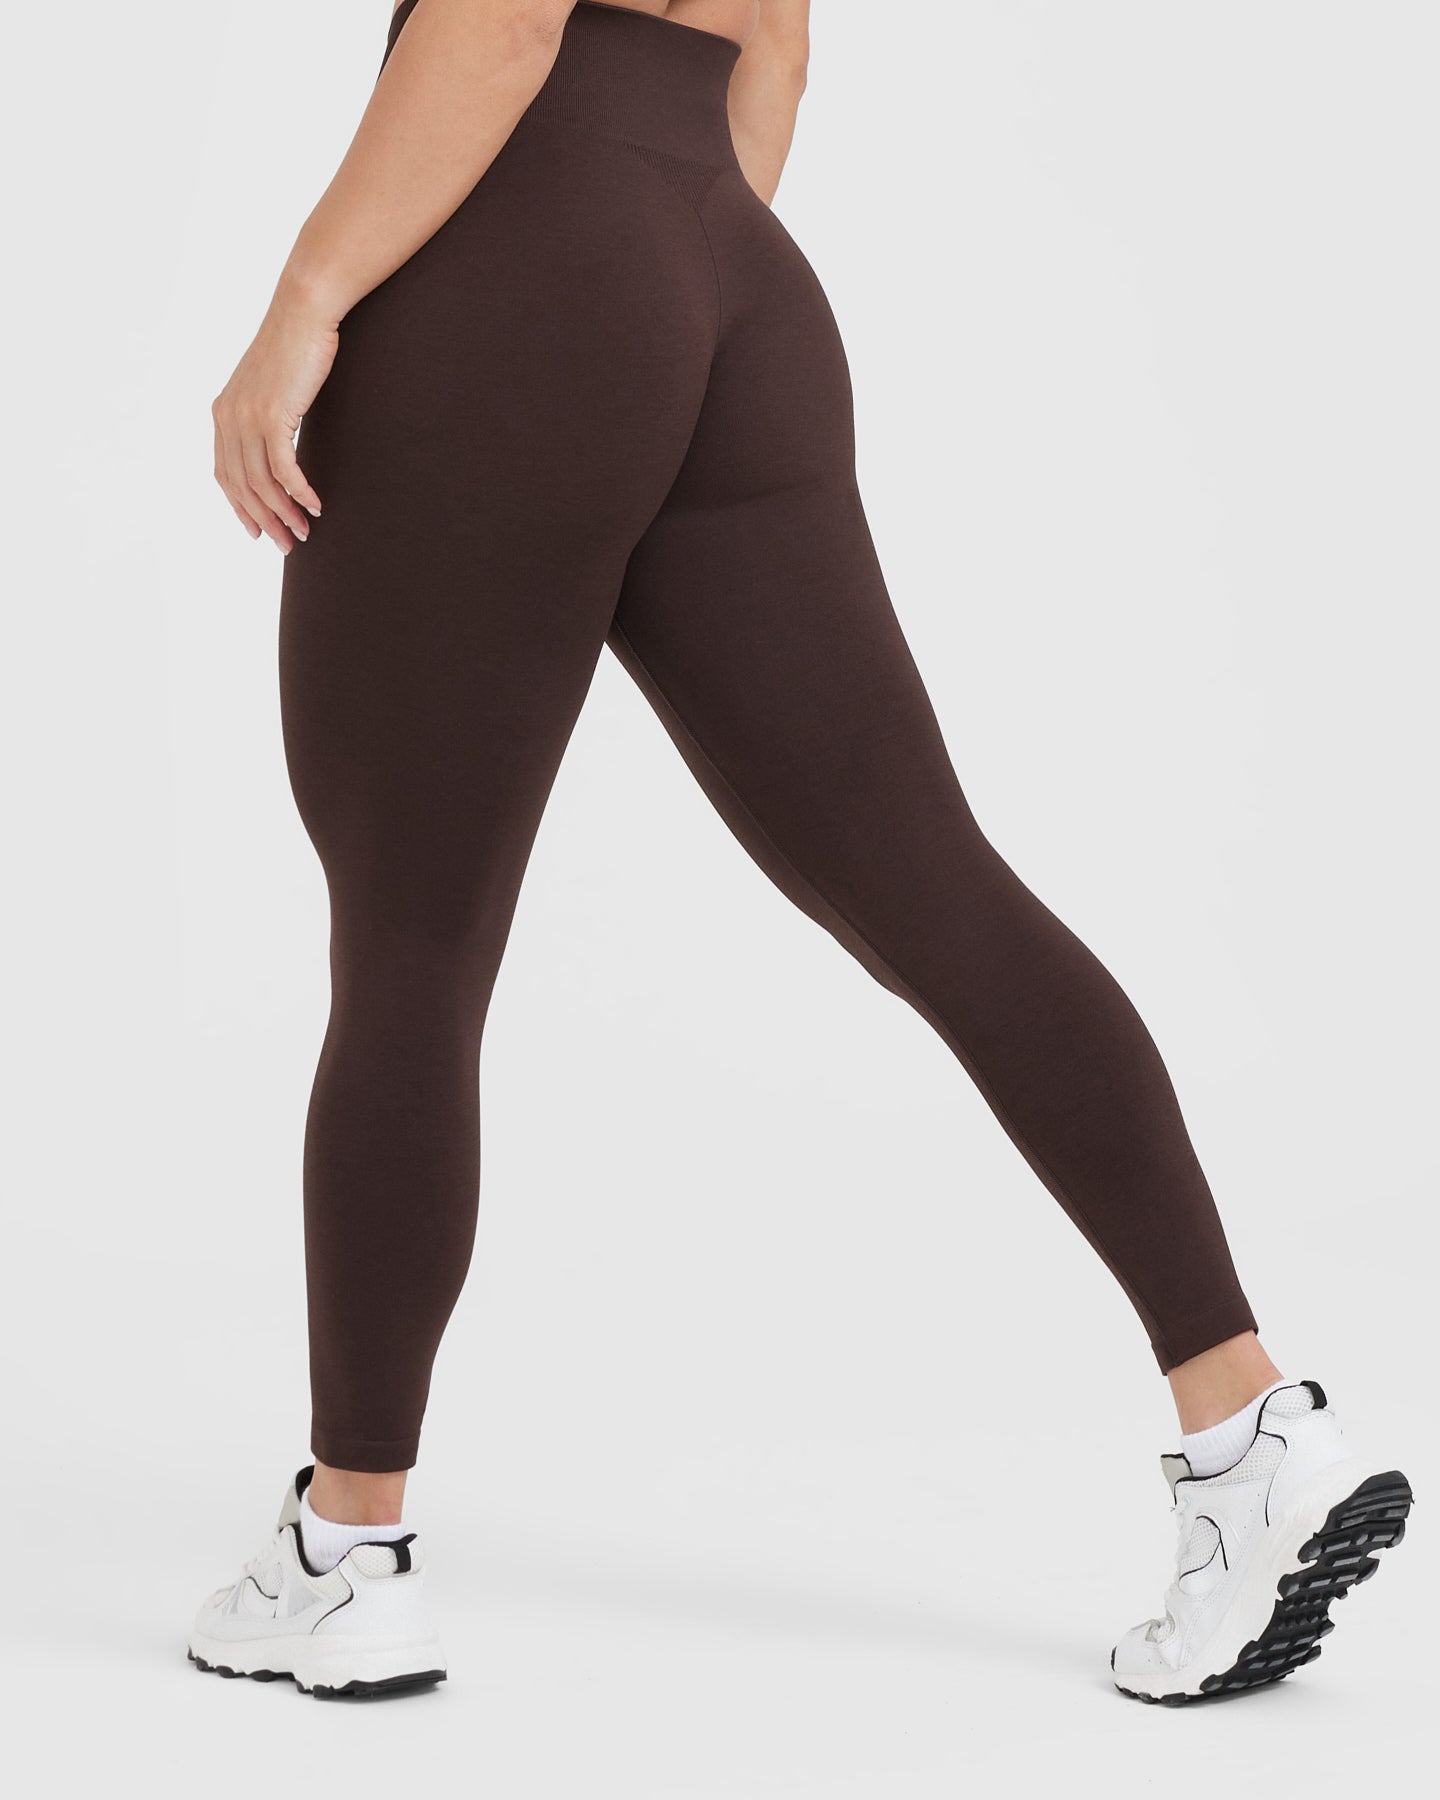 Seamless US 2.0 Marl Active 70% Classic Cocoa Oner Leggings |